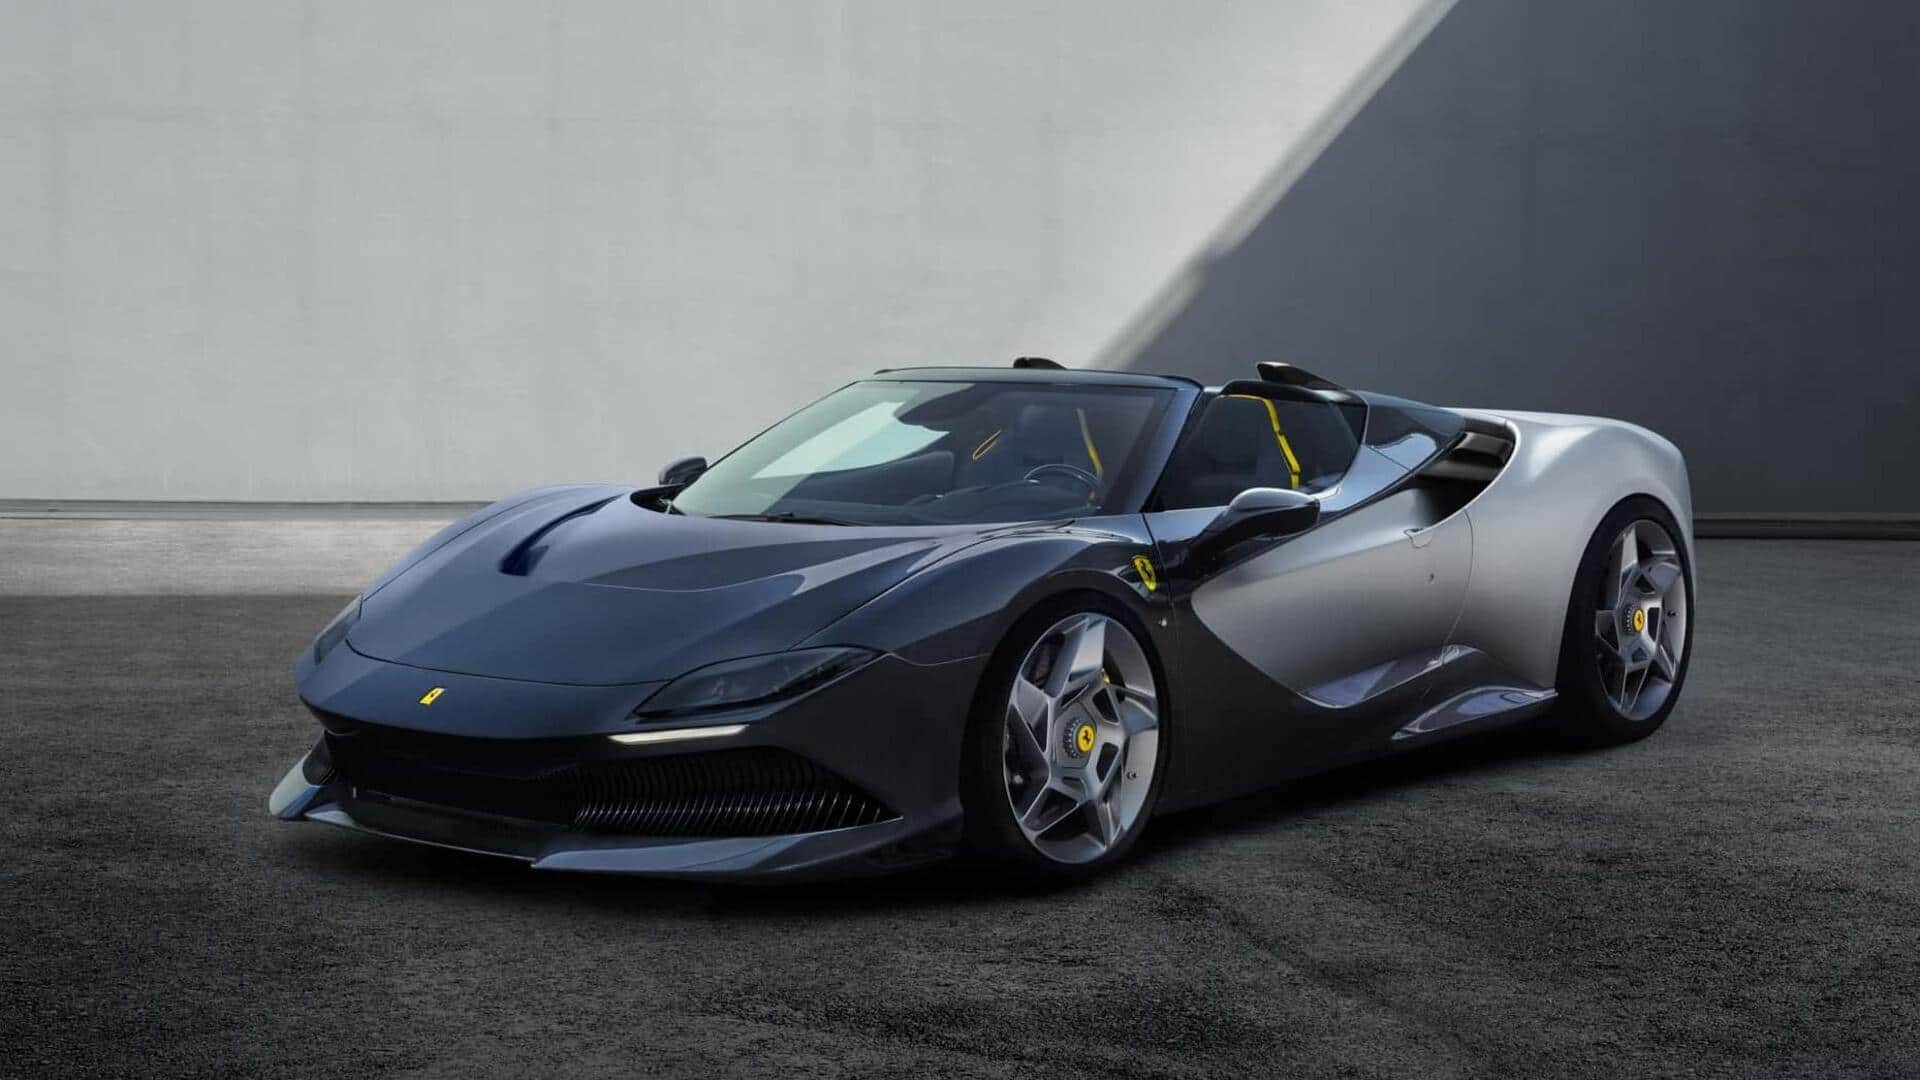 Ferrari SP-8 breaks cover as one-off supercar with 3D-printed grille